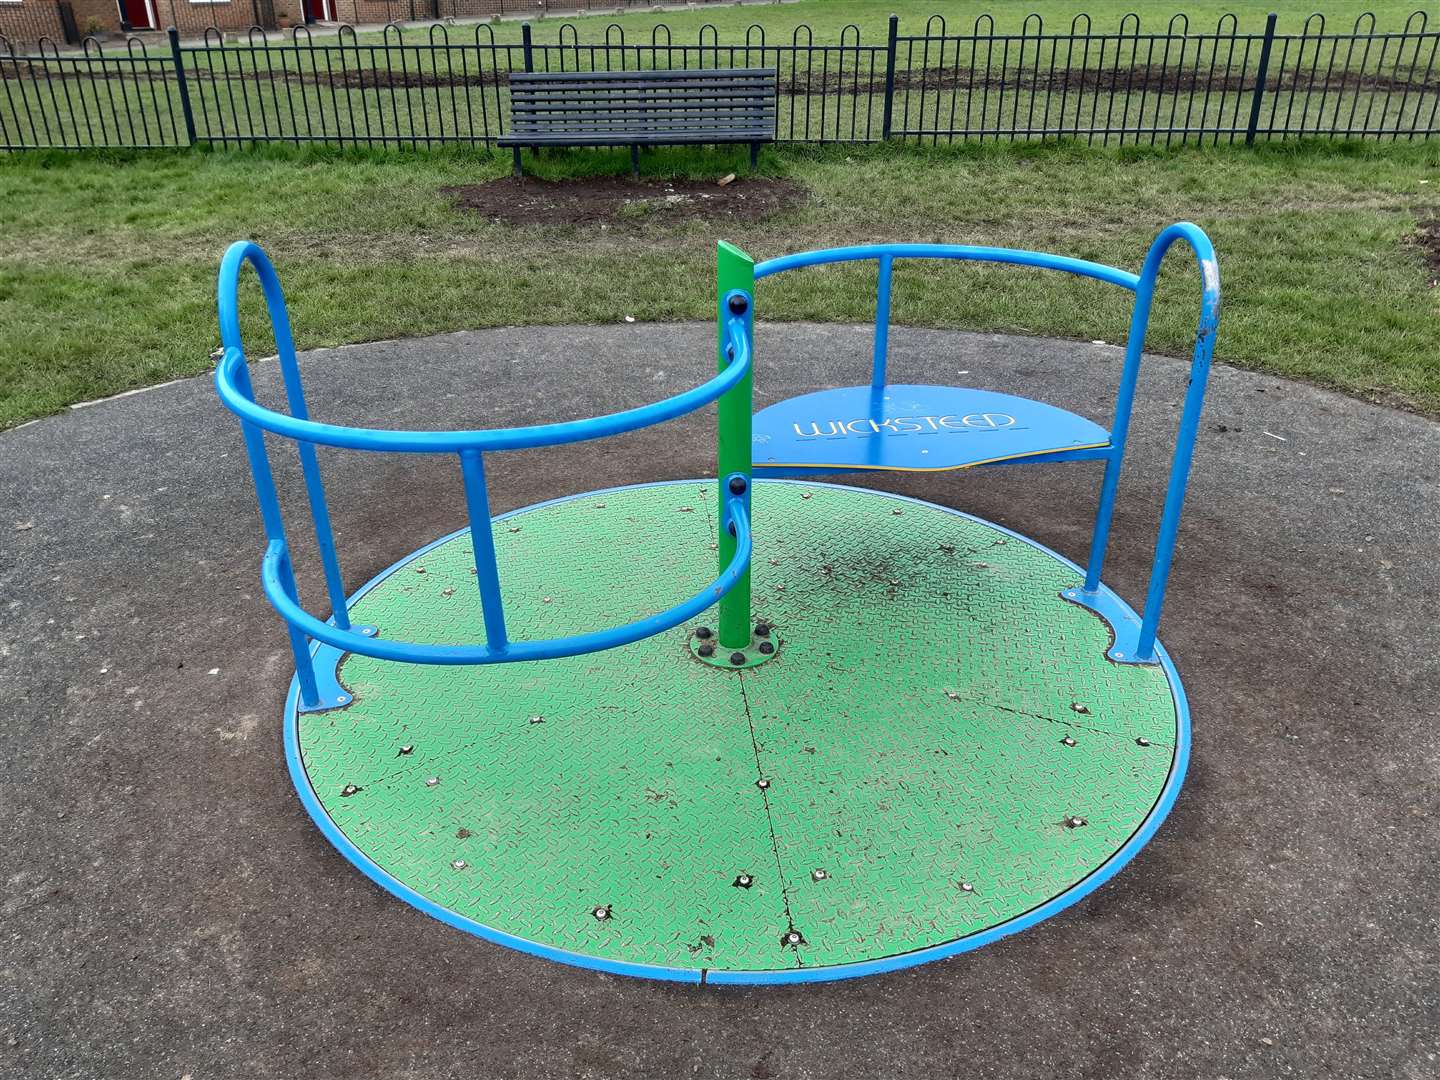 Ball Field park play area also has swings, a mini slide and roundabout, which is wheelchair accessible